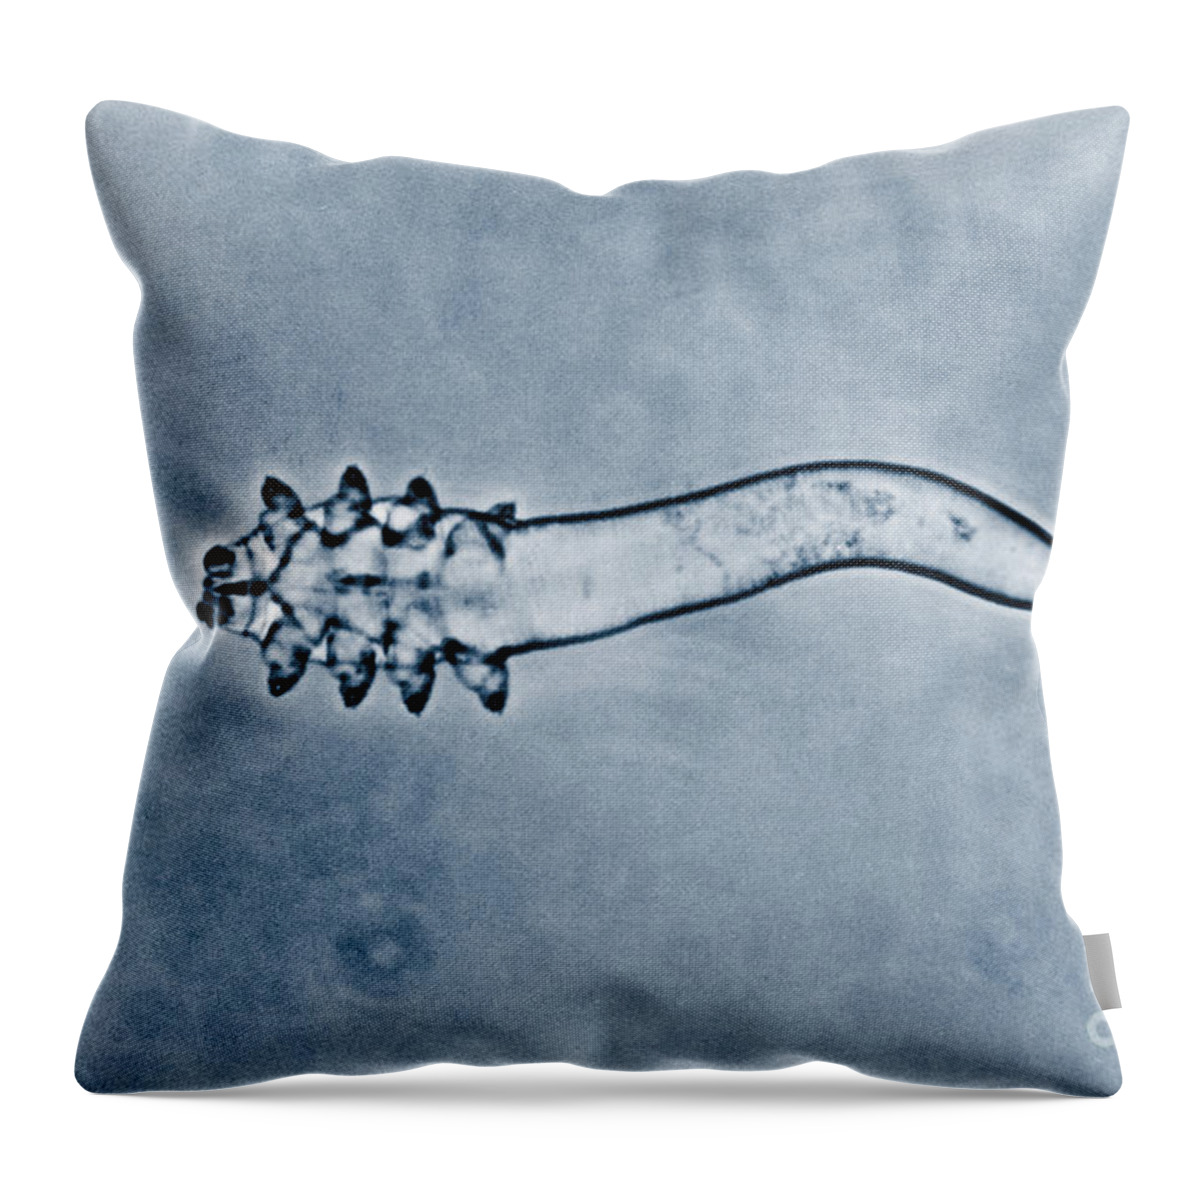 Hair Follicle Mite Throw Pillow featuring the photograph Hair Follicle Mite #2 by Omikron